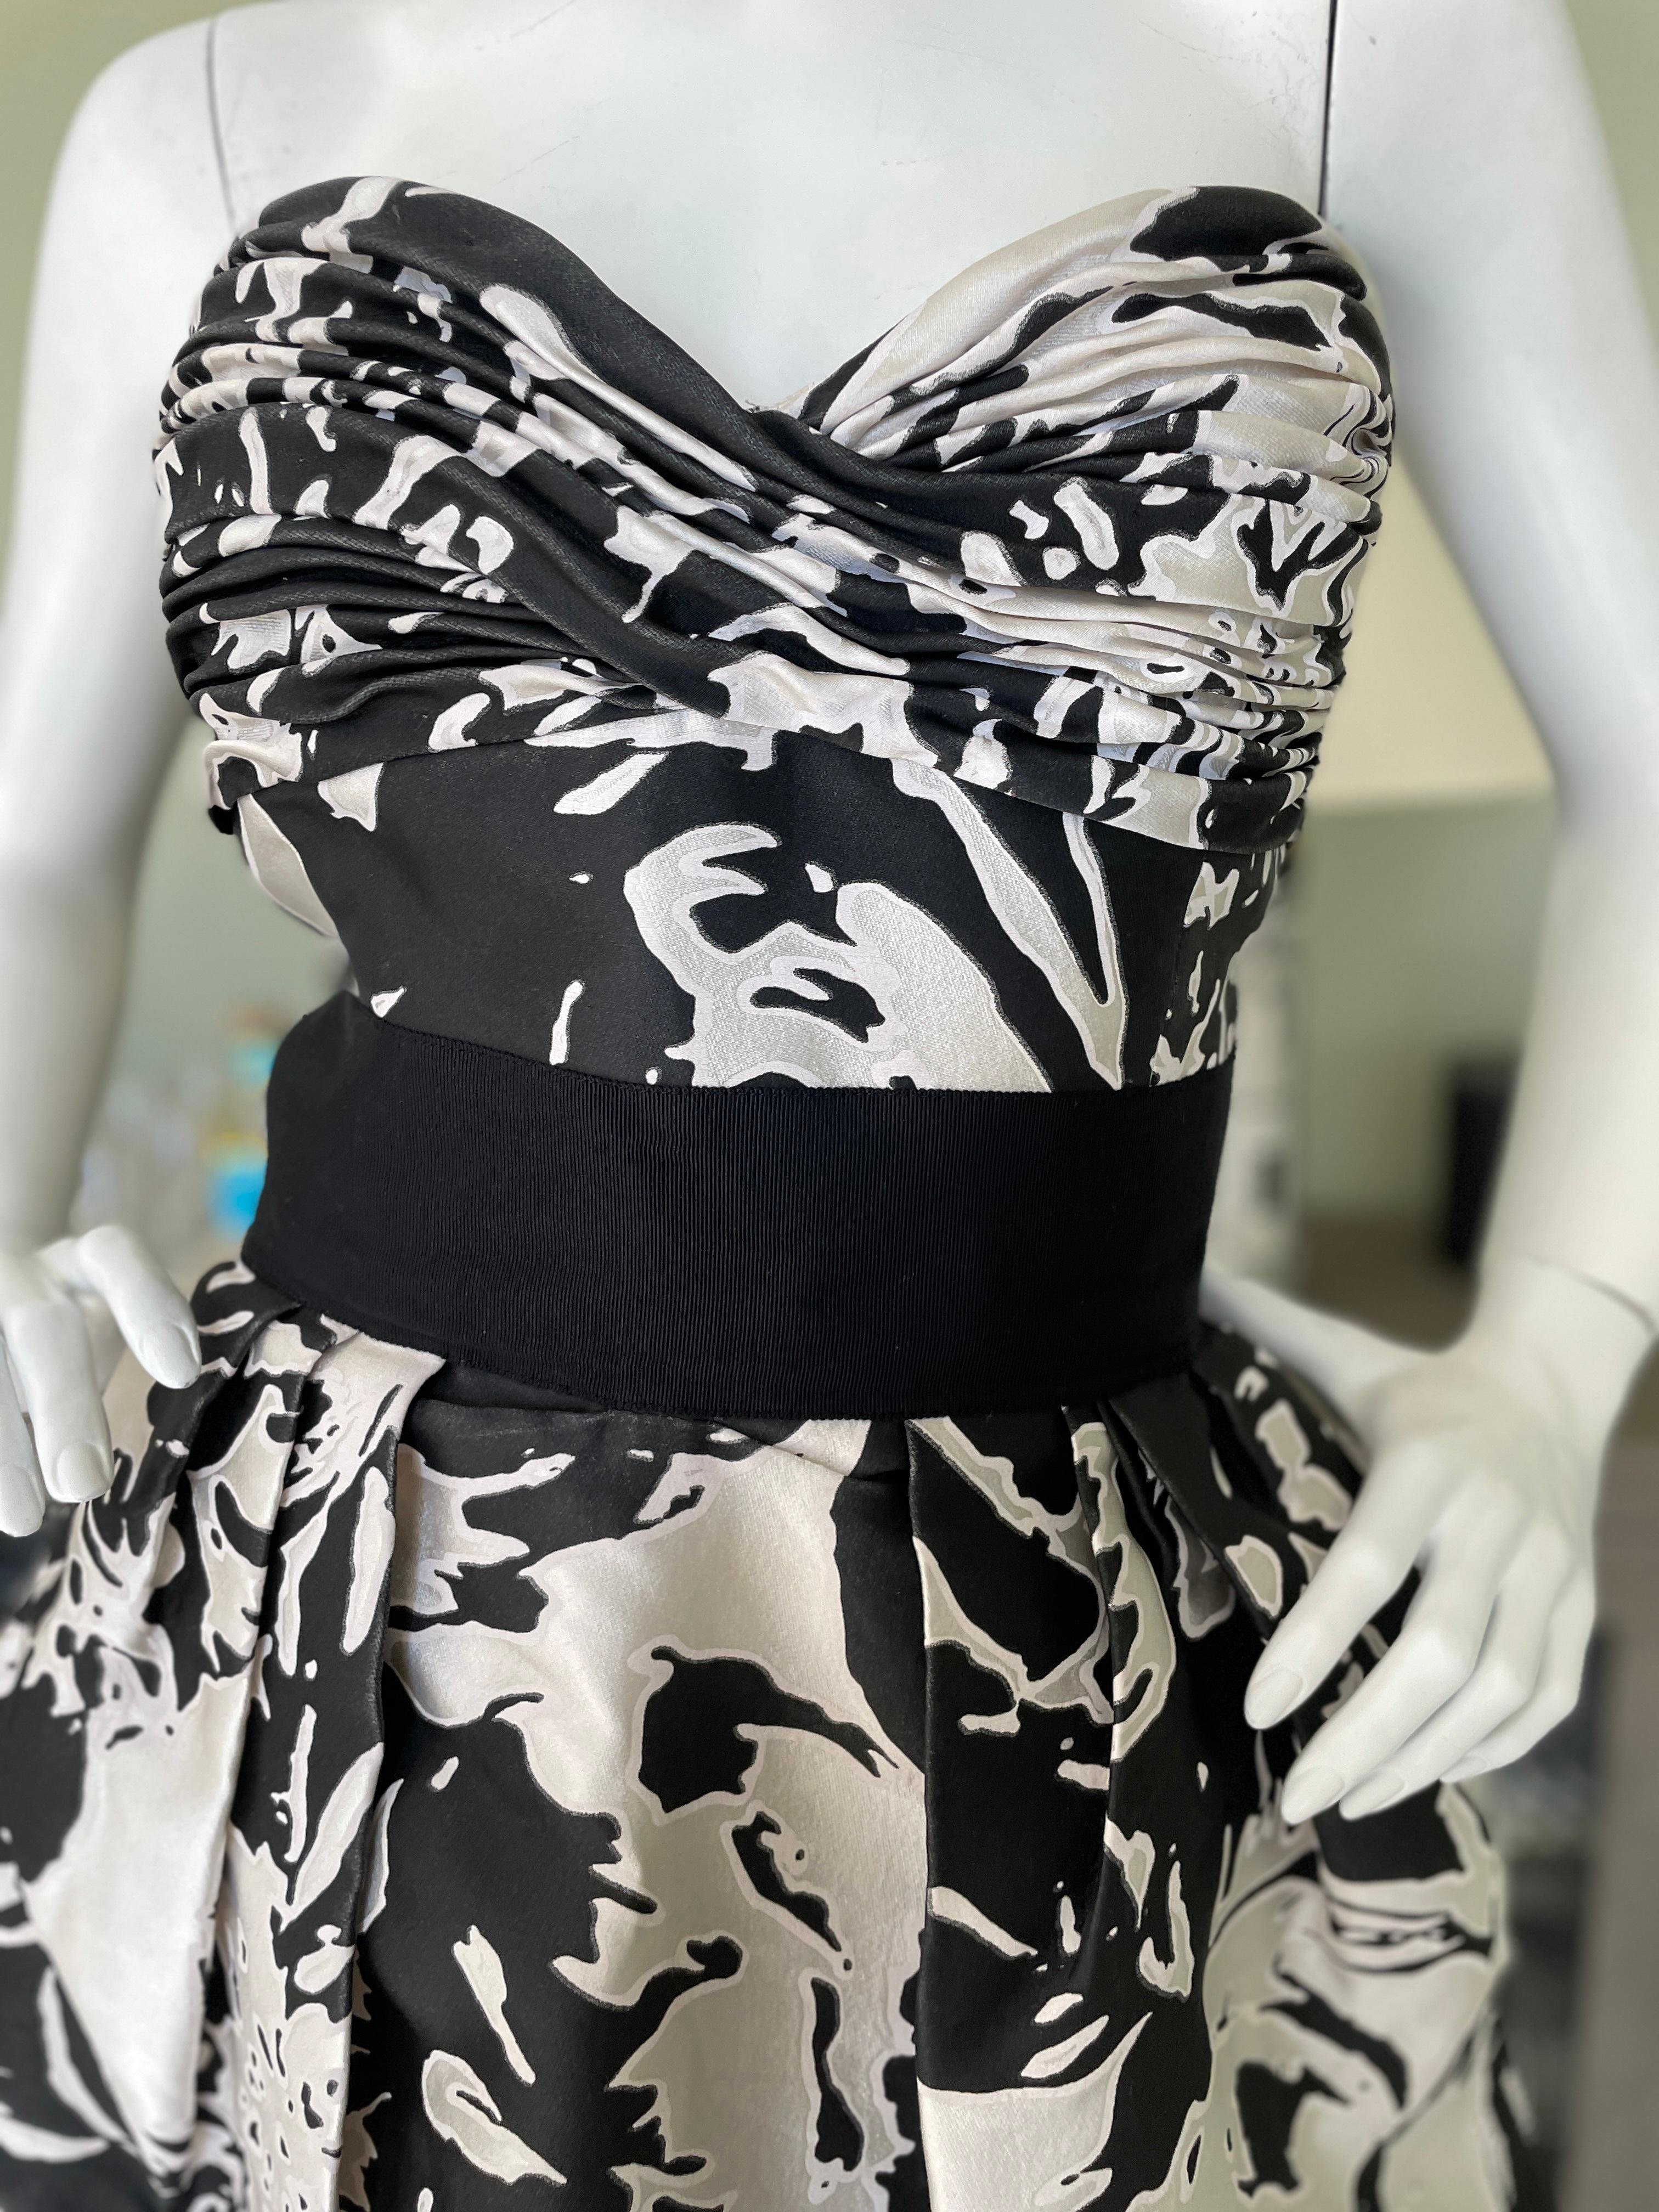 Oscar de la Renta Black and White Strapless Mini Ball Gown Fall 2010   In Excellent Condition For Sale In Cloverdale, CA